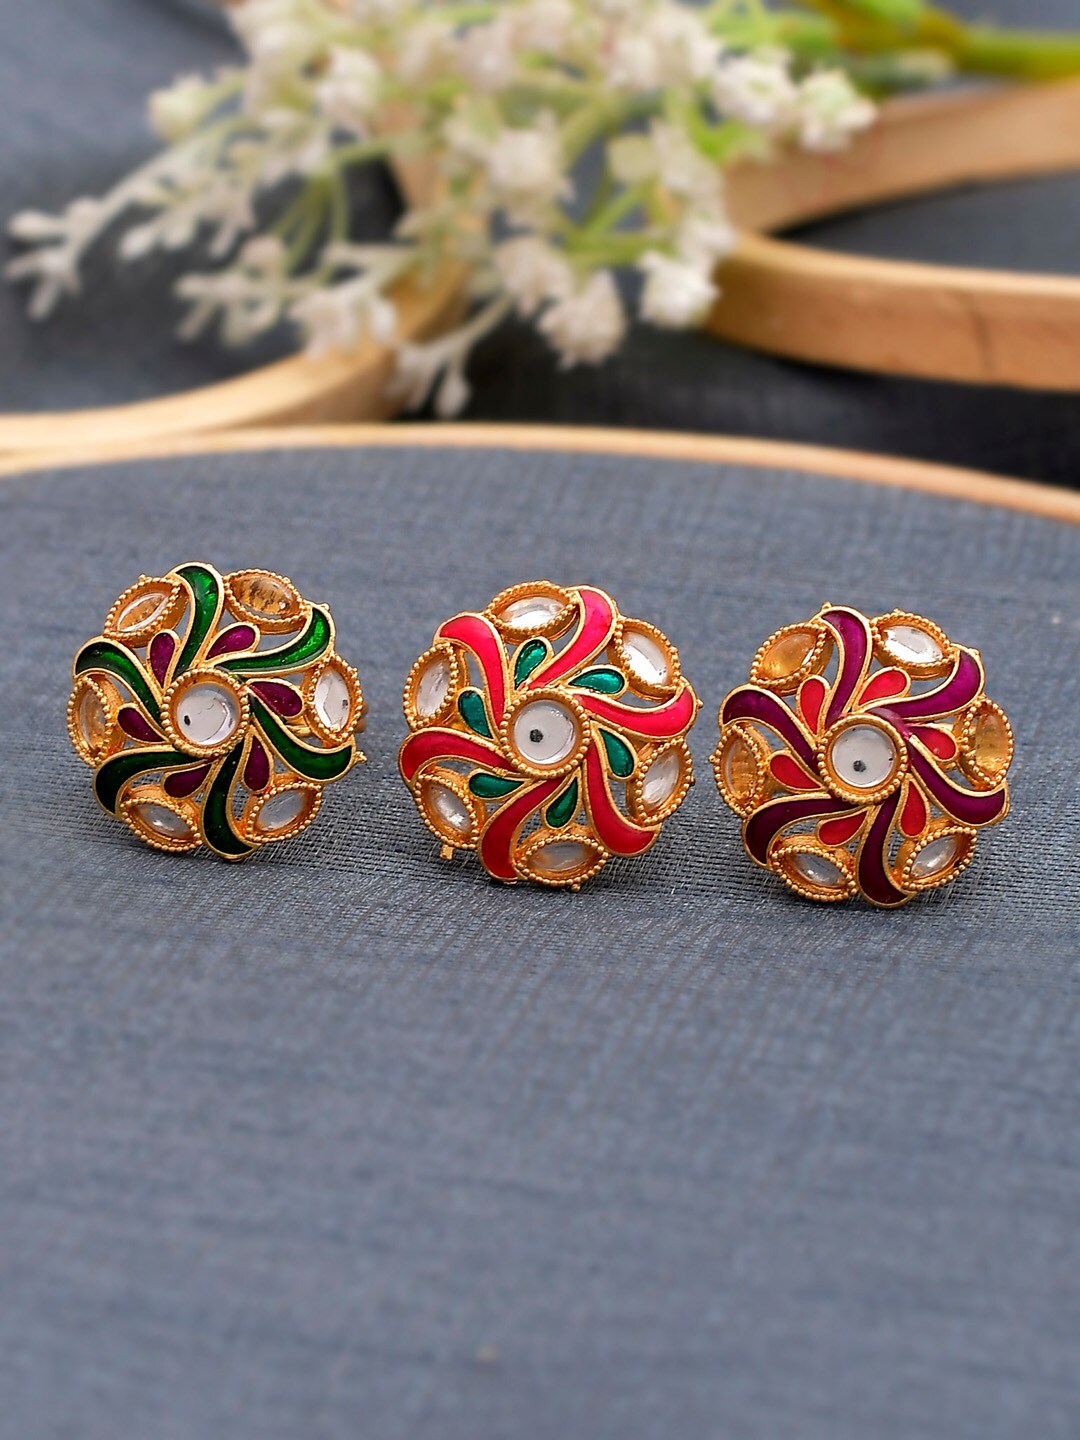 Silvermerc Designs Set Of 3 Gold-Plated White Stone-Studded Meenakari Finger Rings Price in India